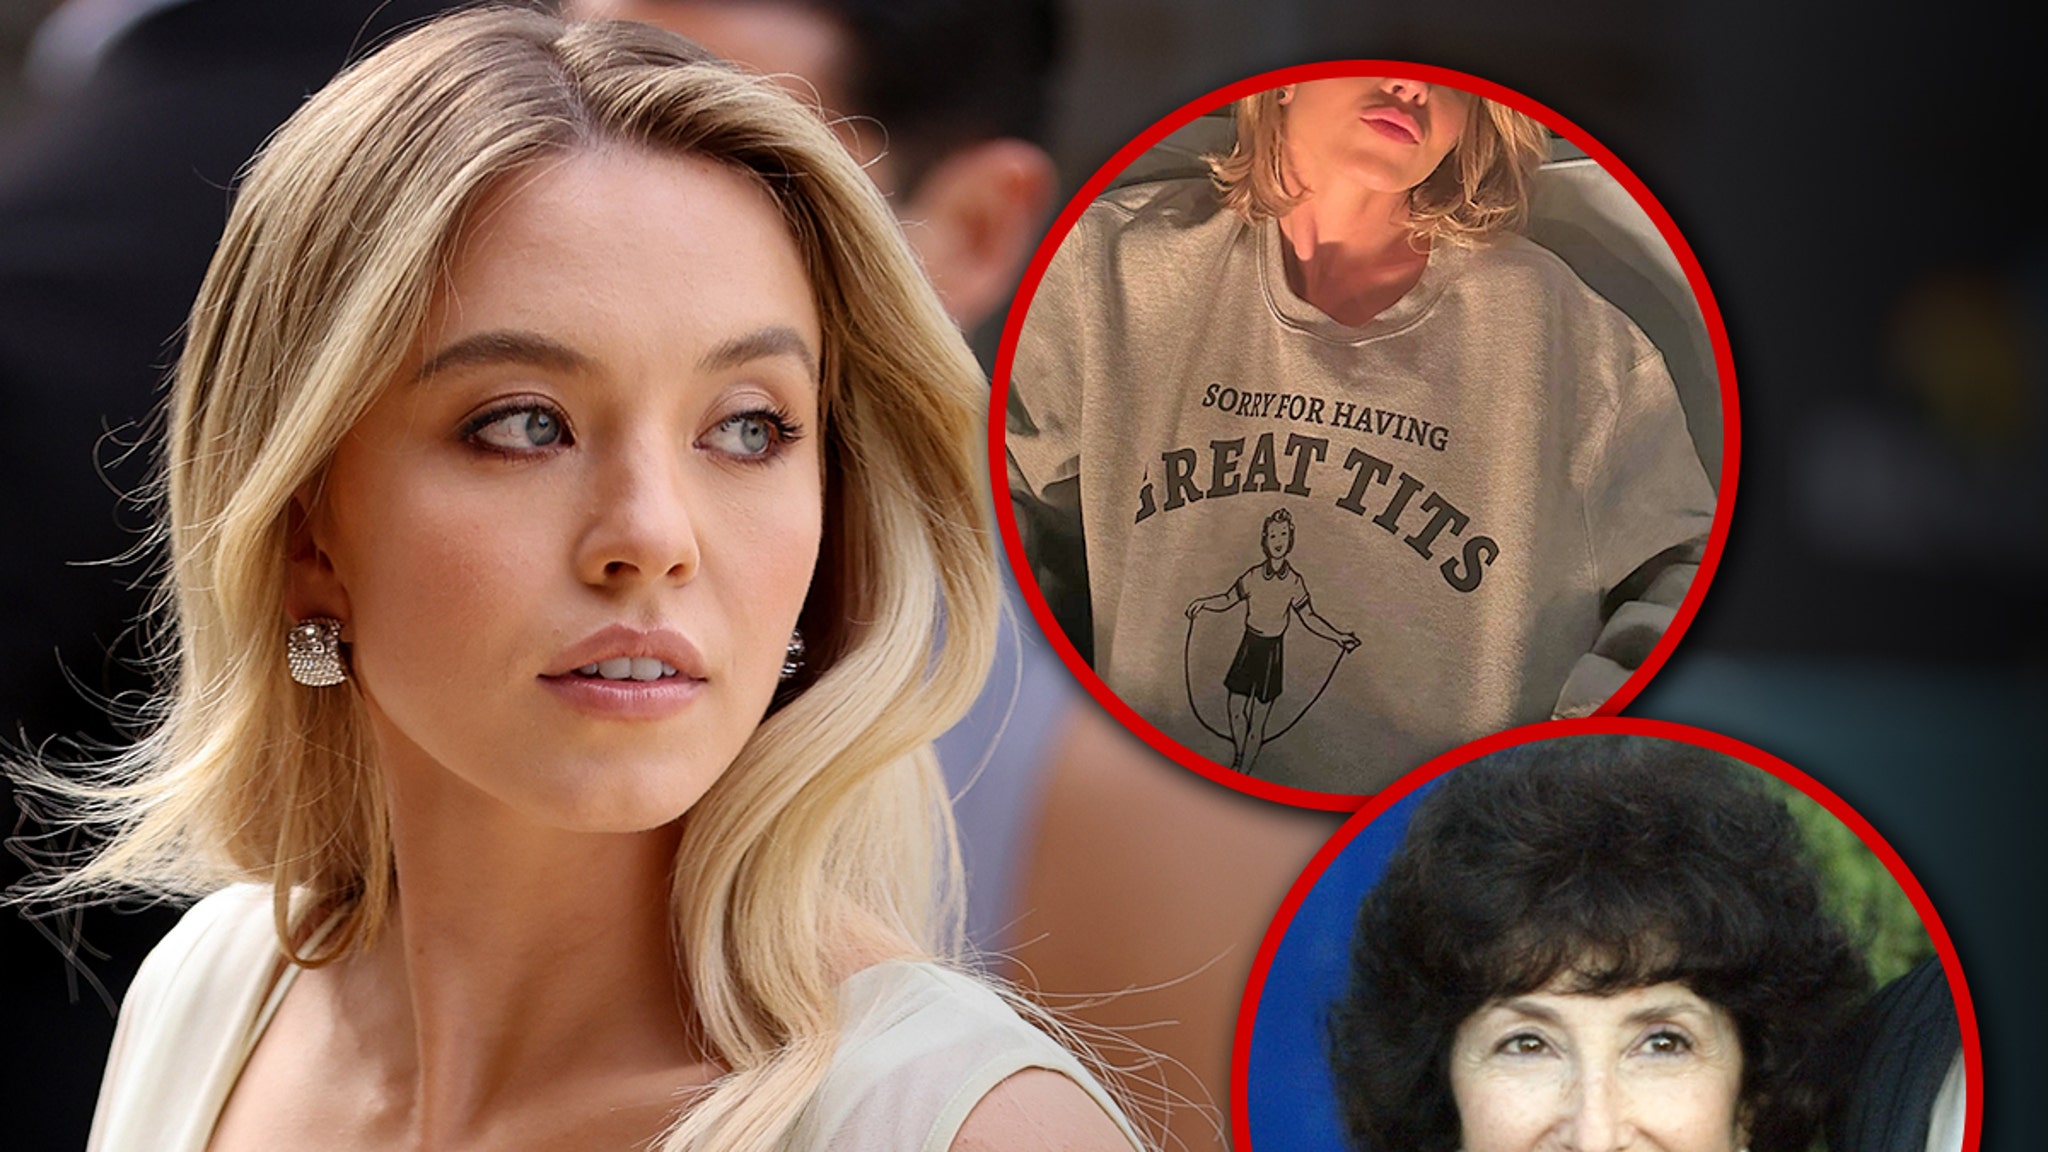 Sydney Sweeney posts hot photos with “Great T**ts”